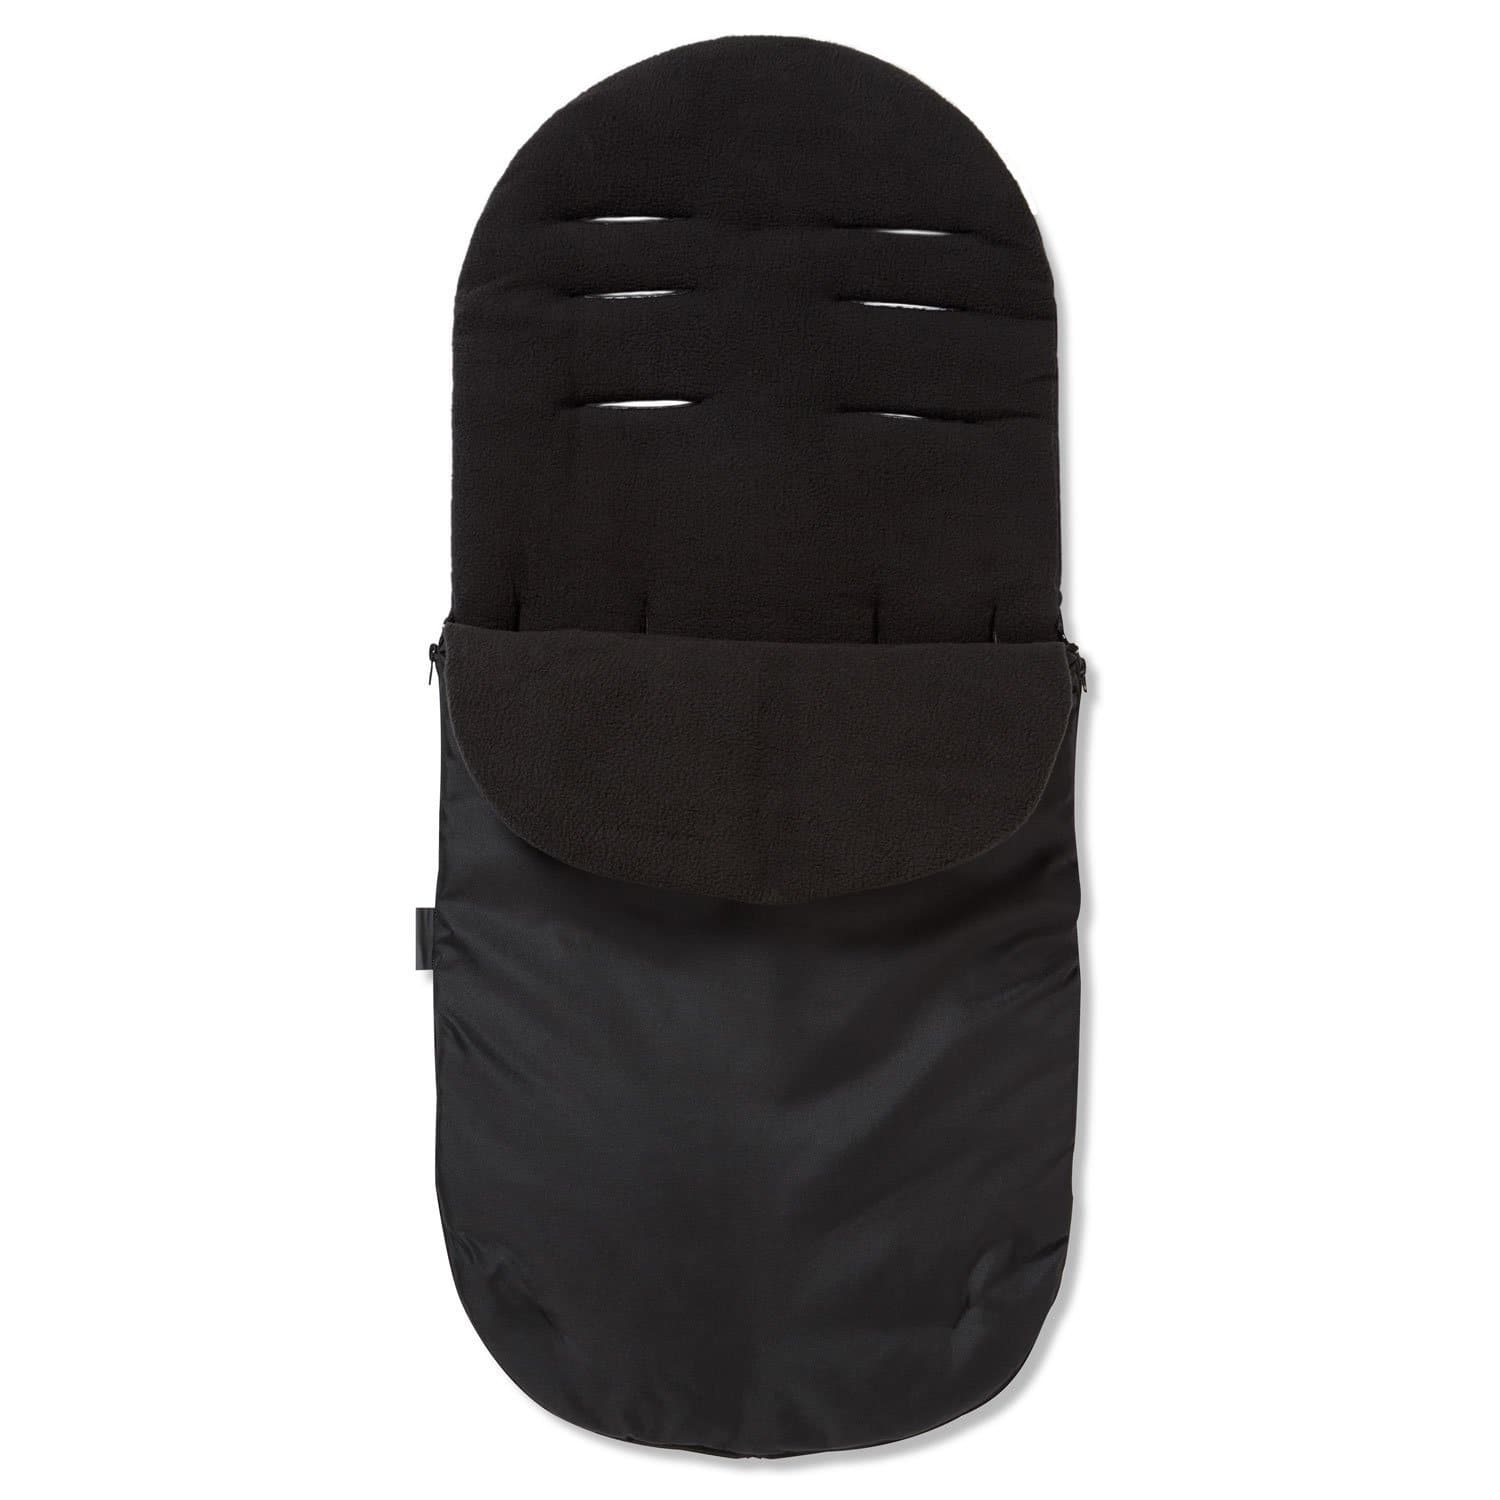 Footmuff / Cosy Toes Compatible with Looping - Black / Fits All Models | For Your Little One